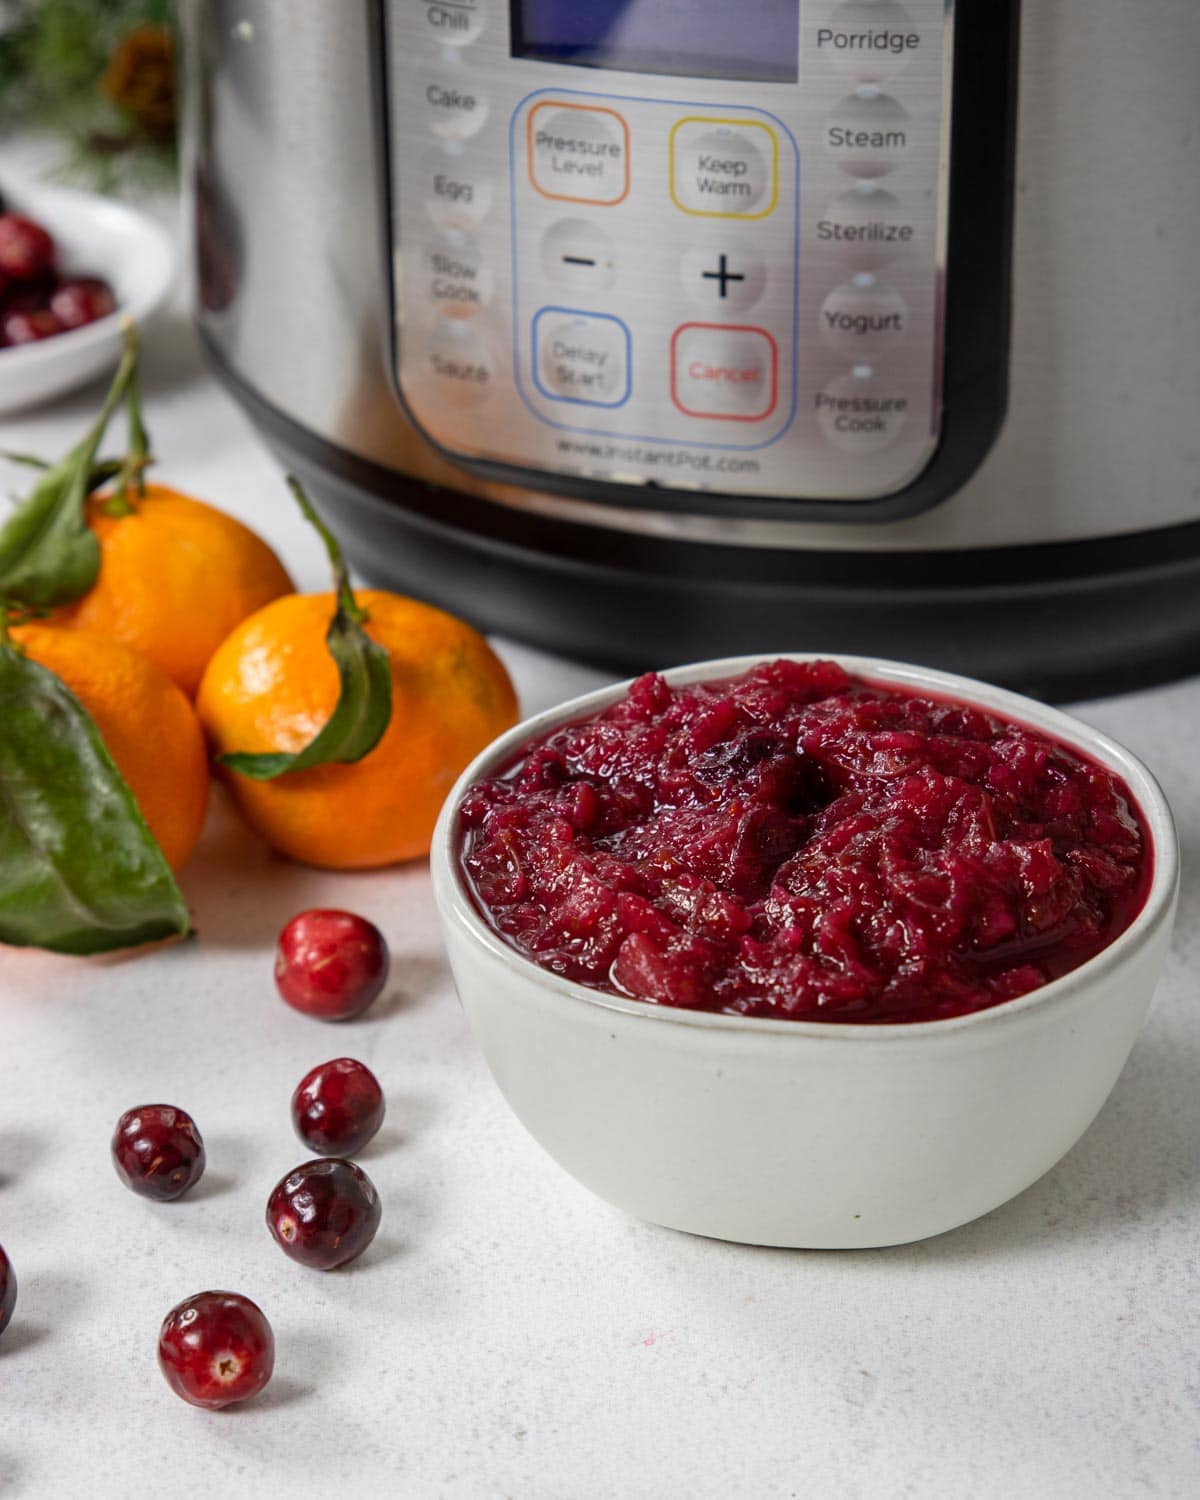 A bowl of cranberry sauce and an electric pressure cooker in the background